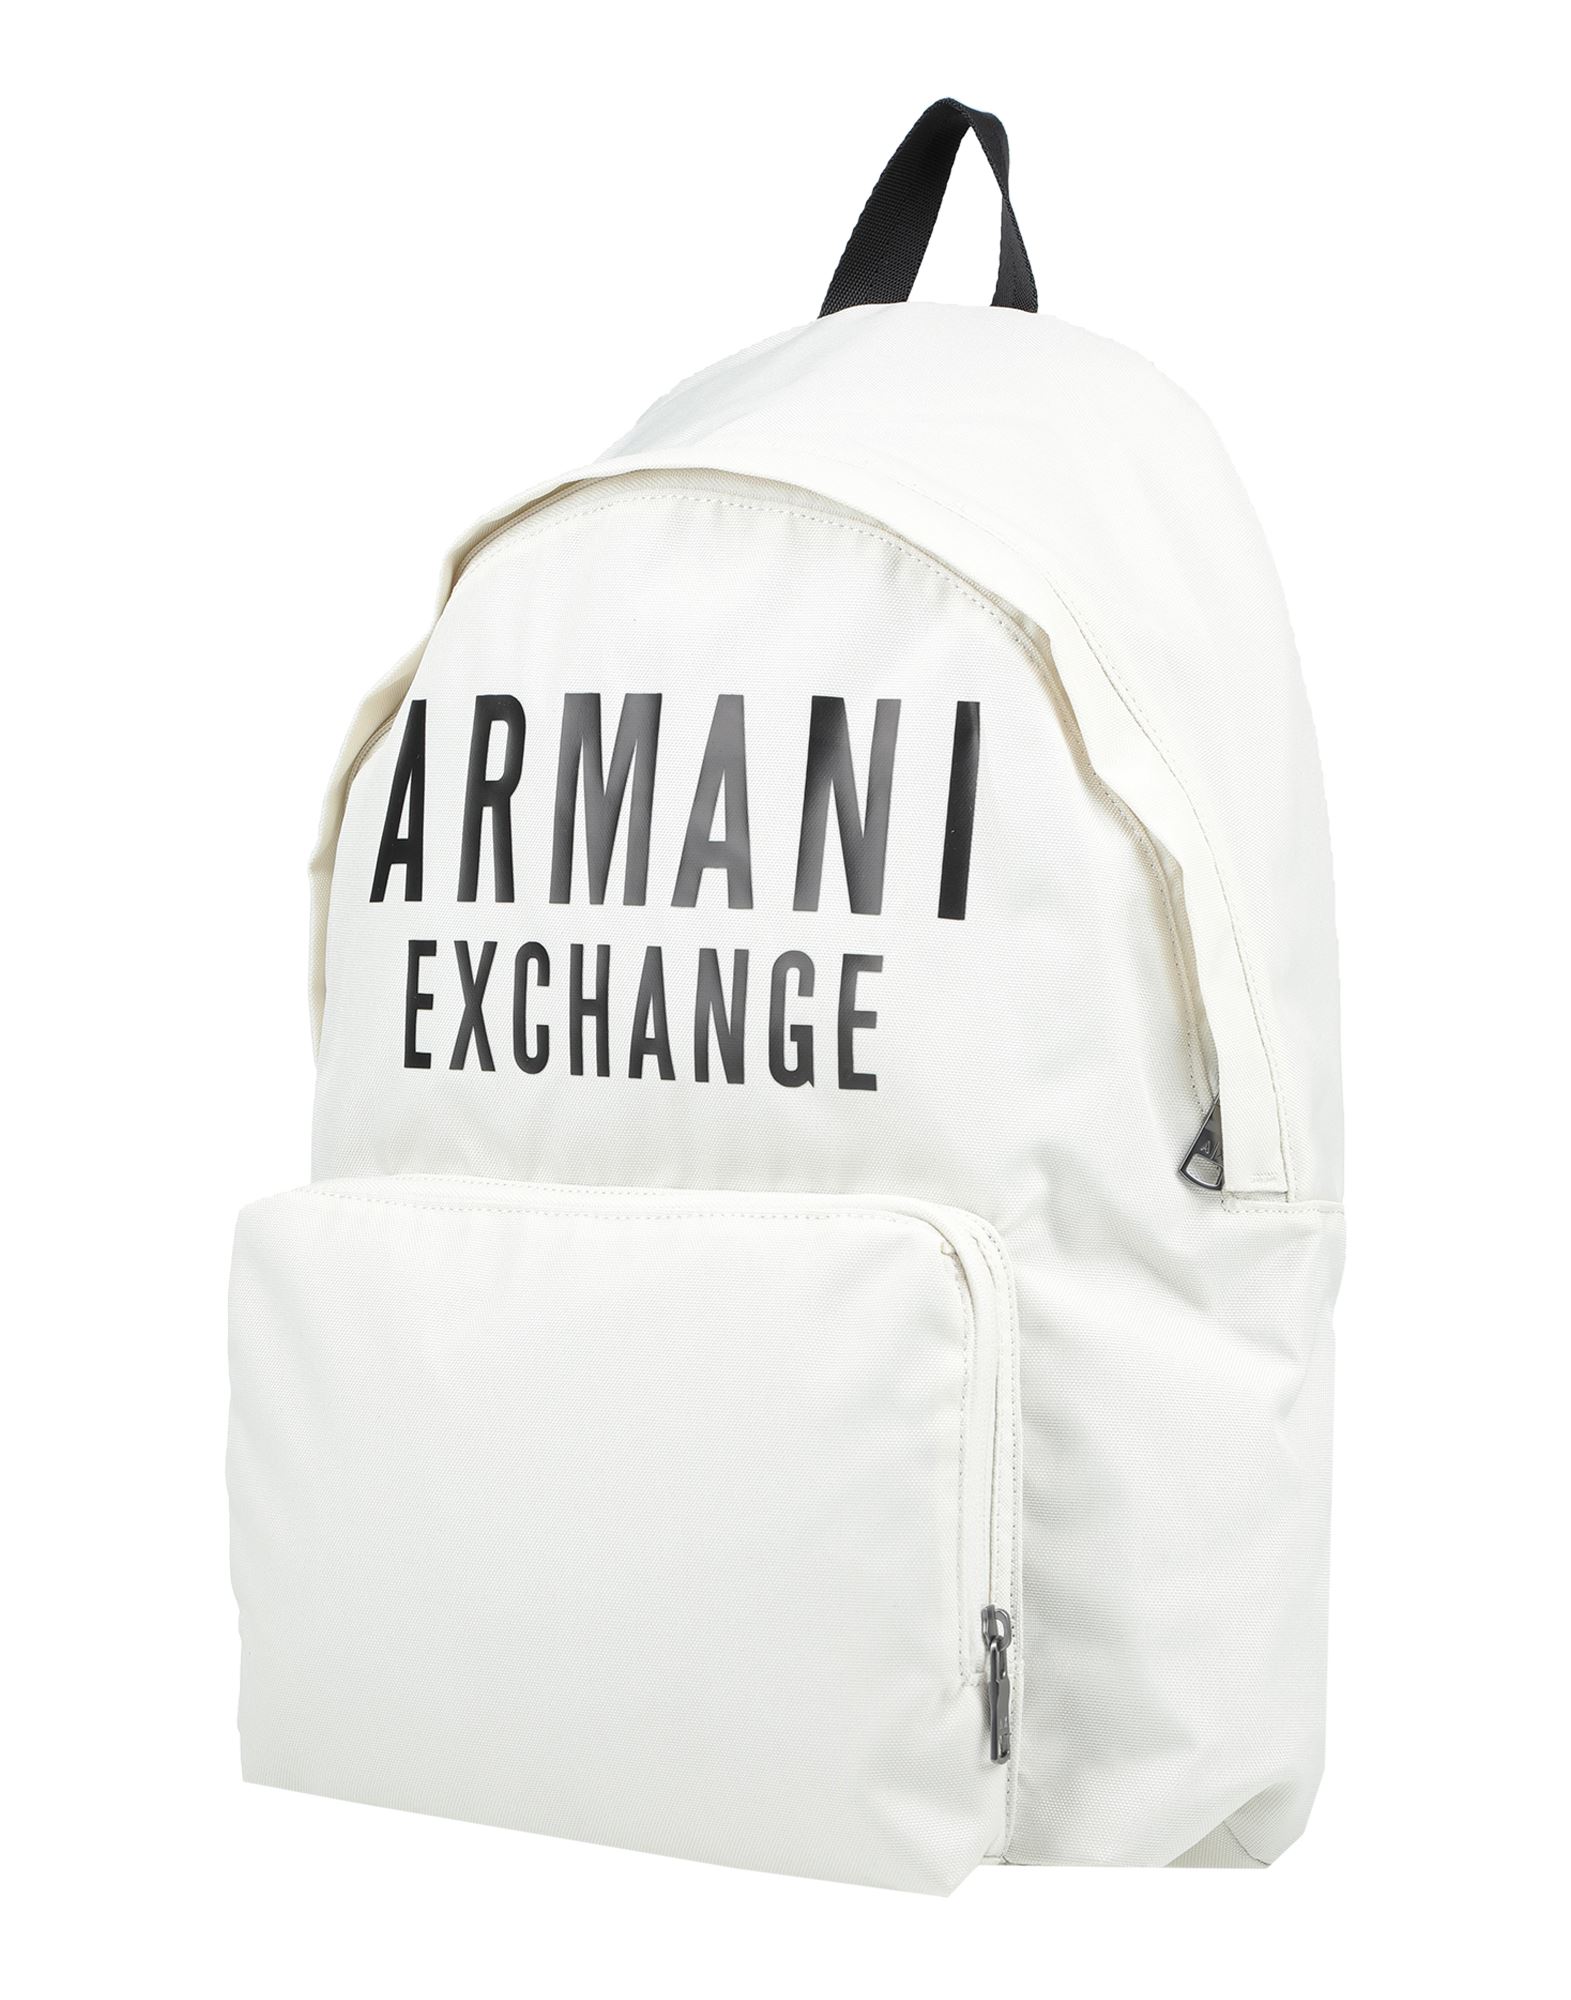 Armani Exchange School Bags Cheap Collection, Save 42% 